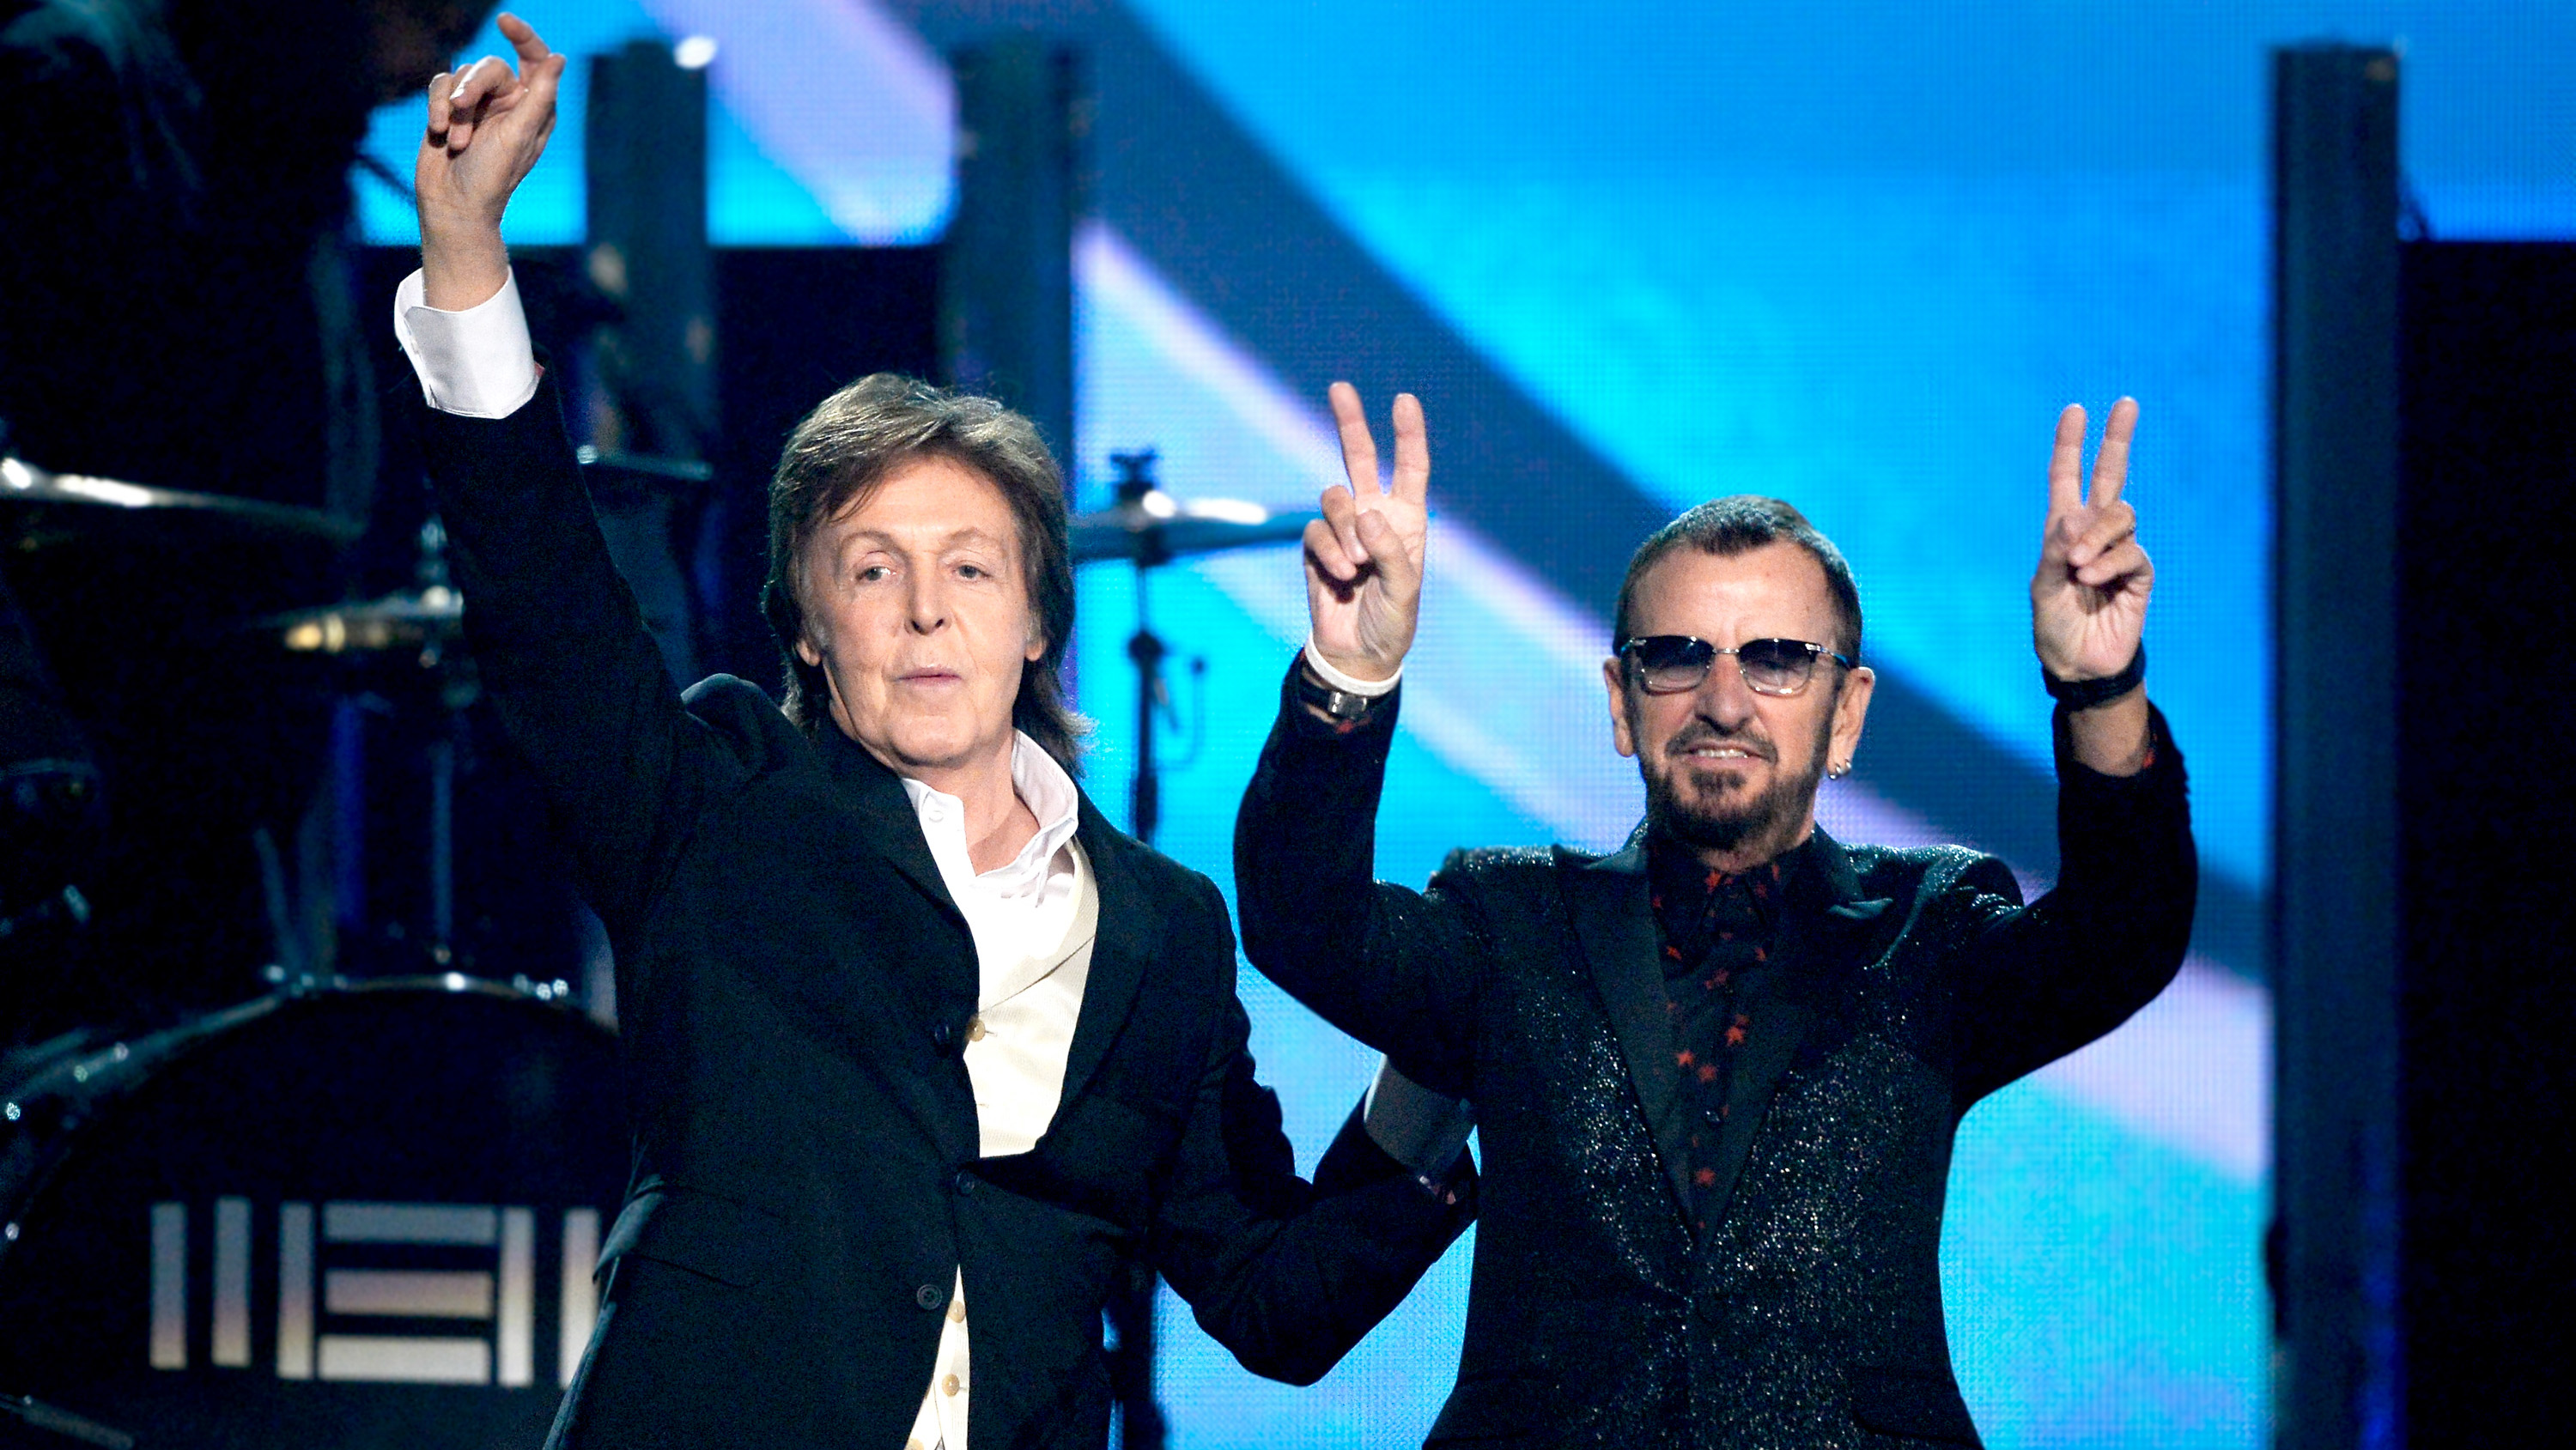 LOS ANGELES, CA - JANUARY 26:Musicians Paul McCartney (L) and Ringo Starr of The Beatles perform onstage during the 56th GRAMMY Awards at Staples Center on January 26, 2014 in Los Angeles, Ca